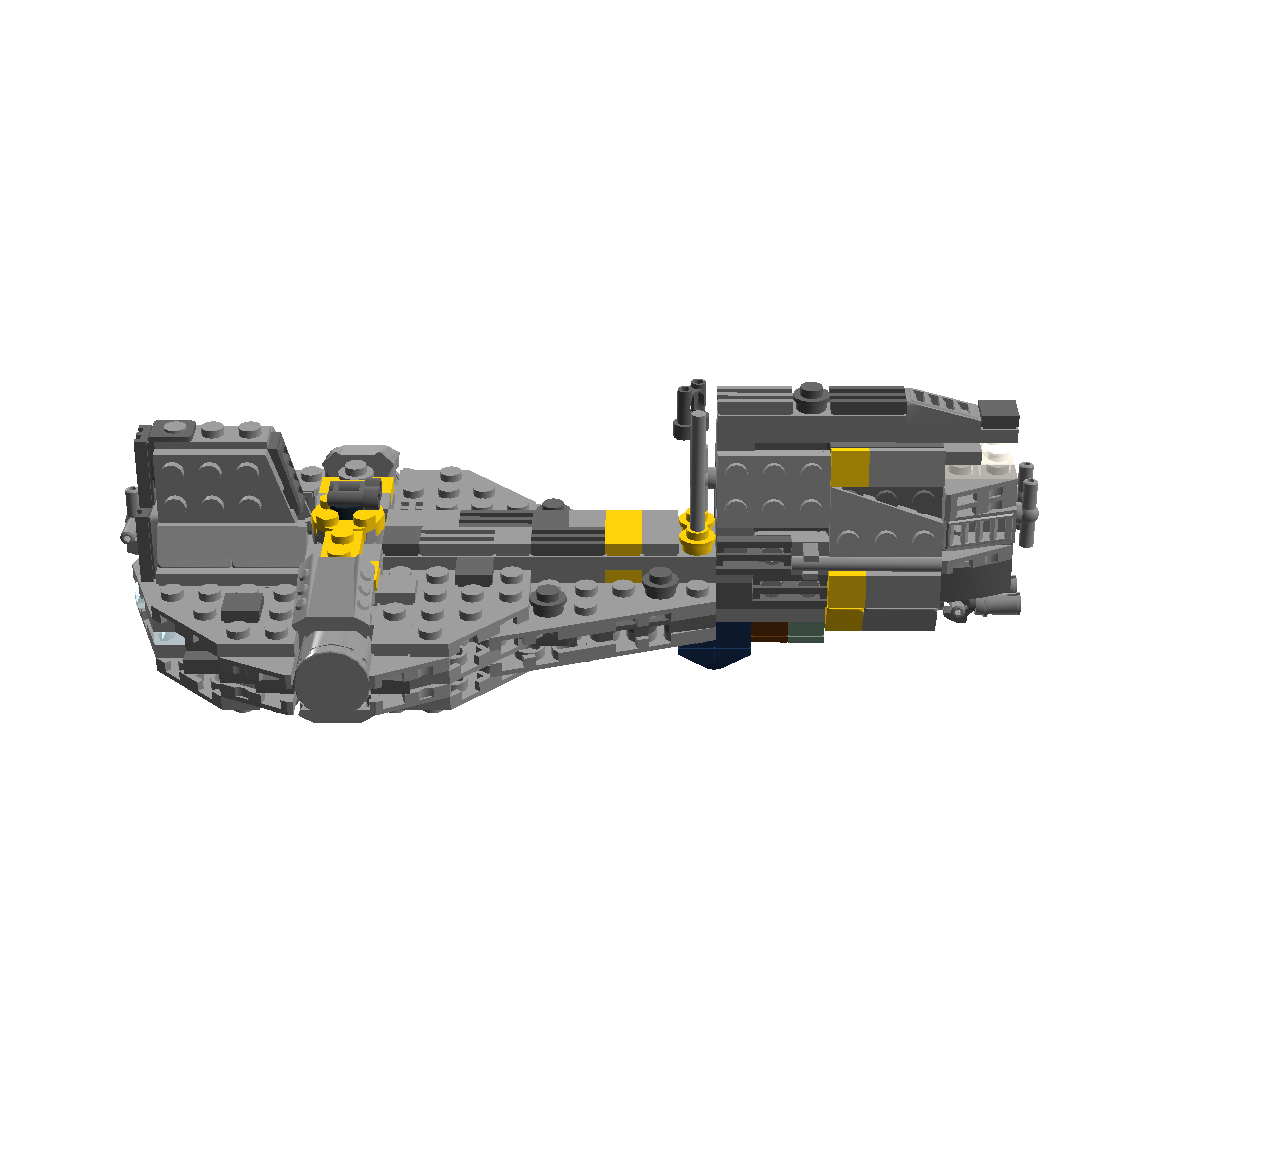 cargo_freighter_side.png